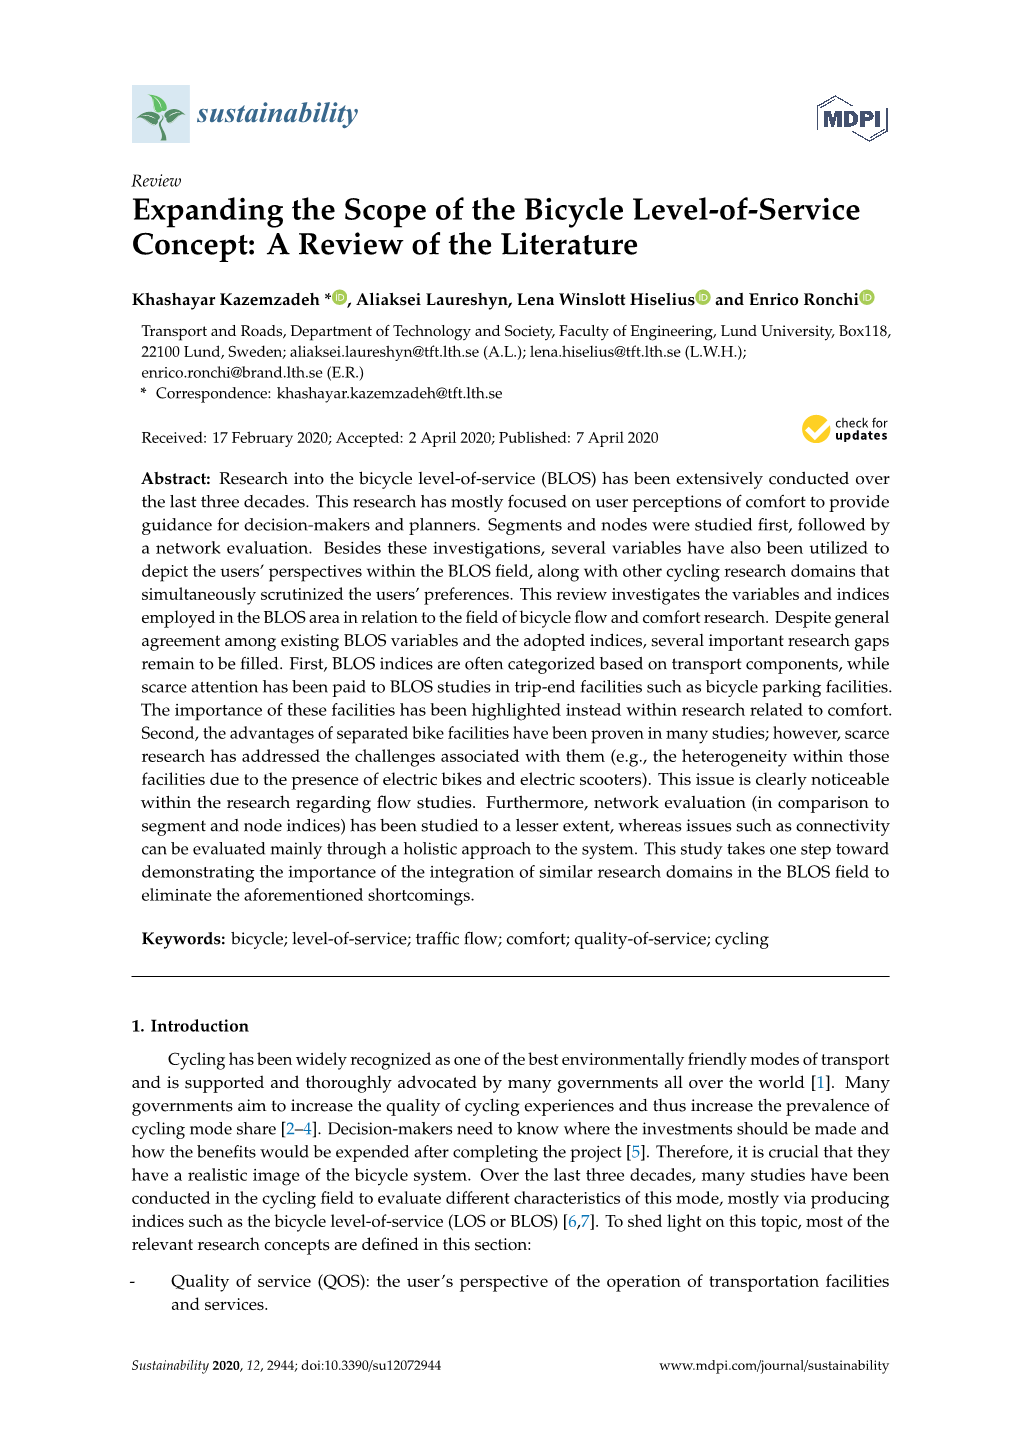 Expanding the Scope of the Bicycle Level-Of-Service Concept: a Review of the Literature